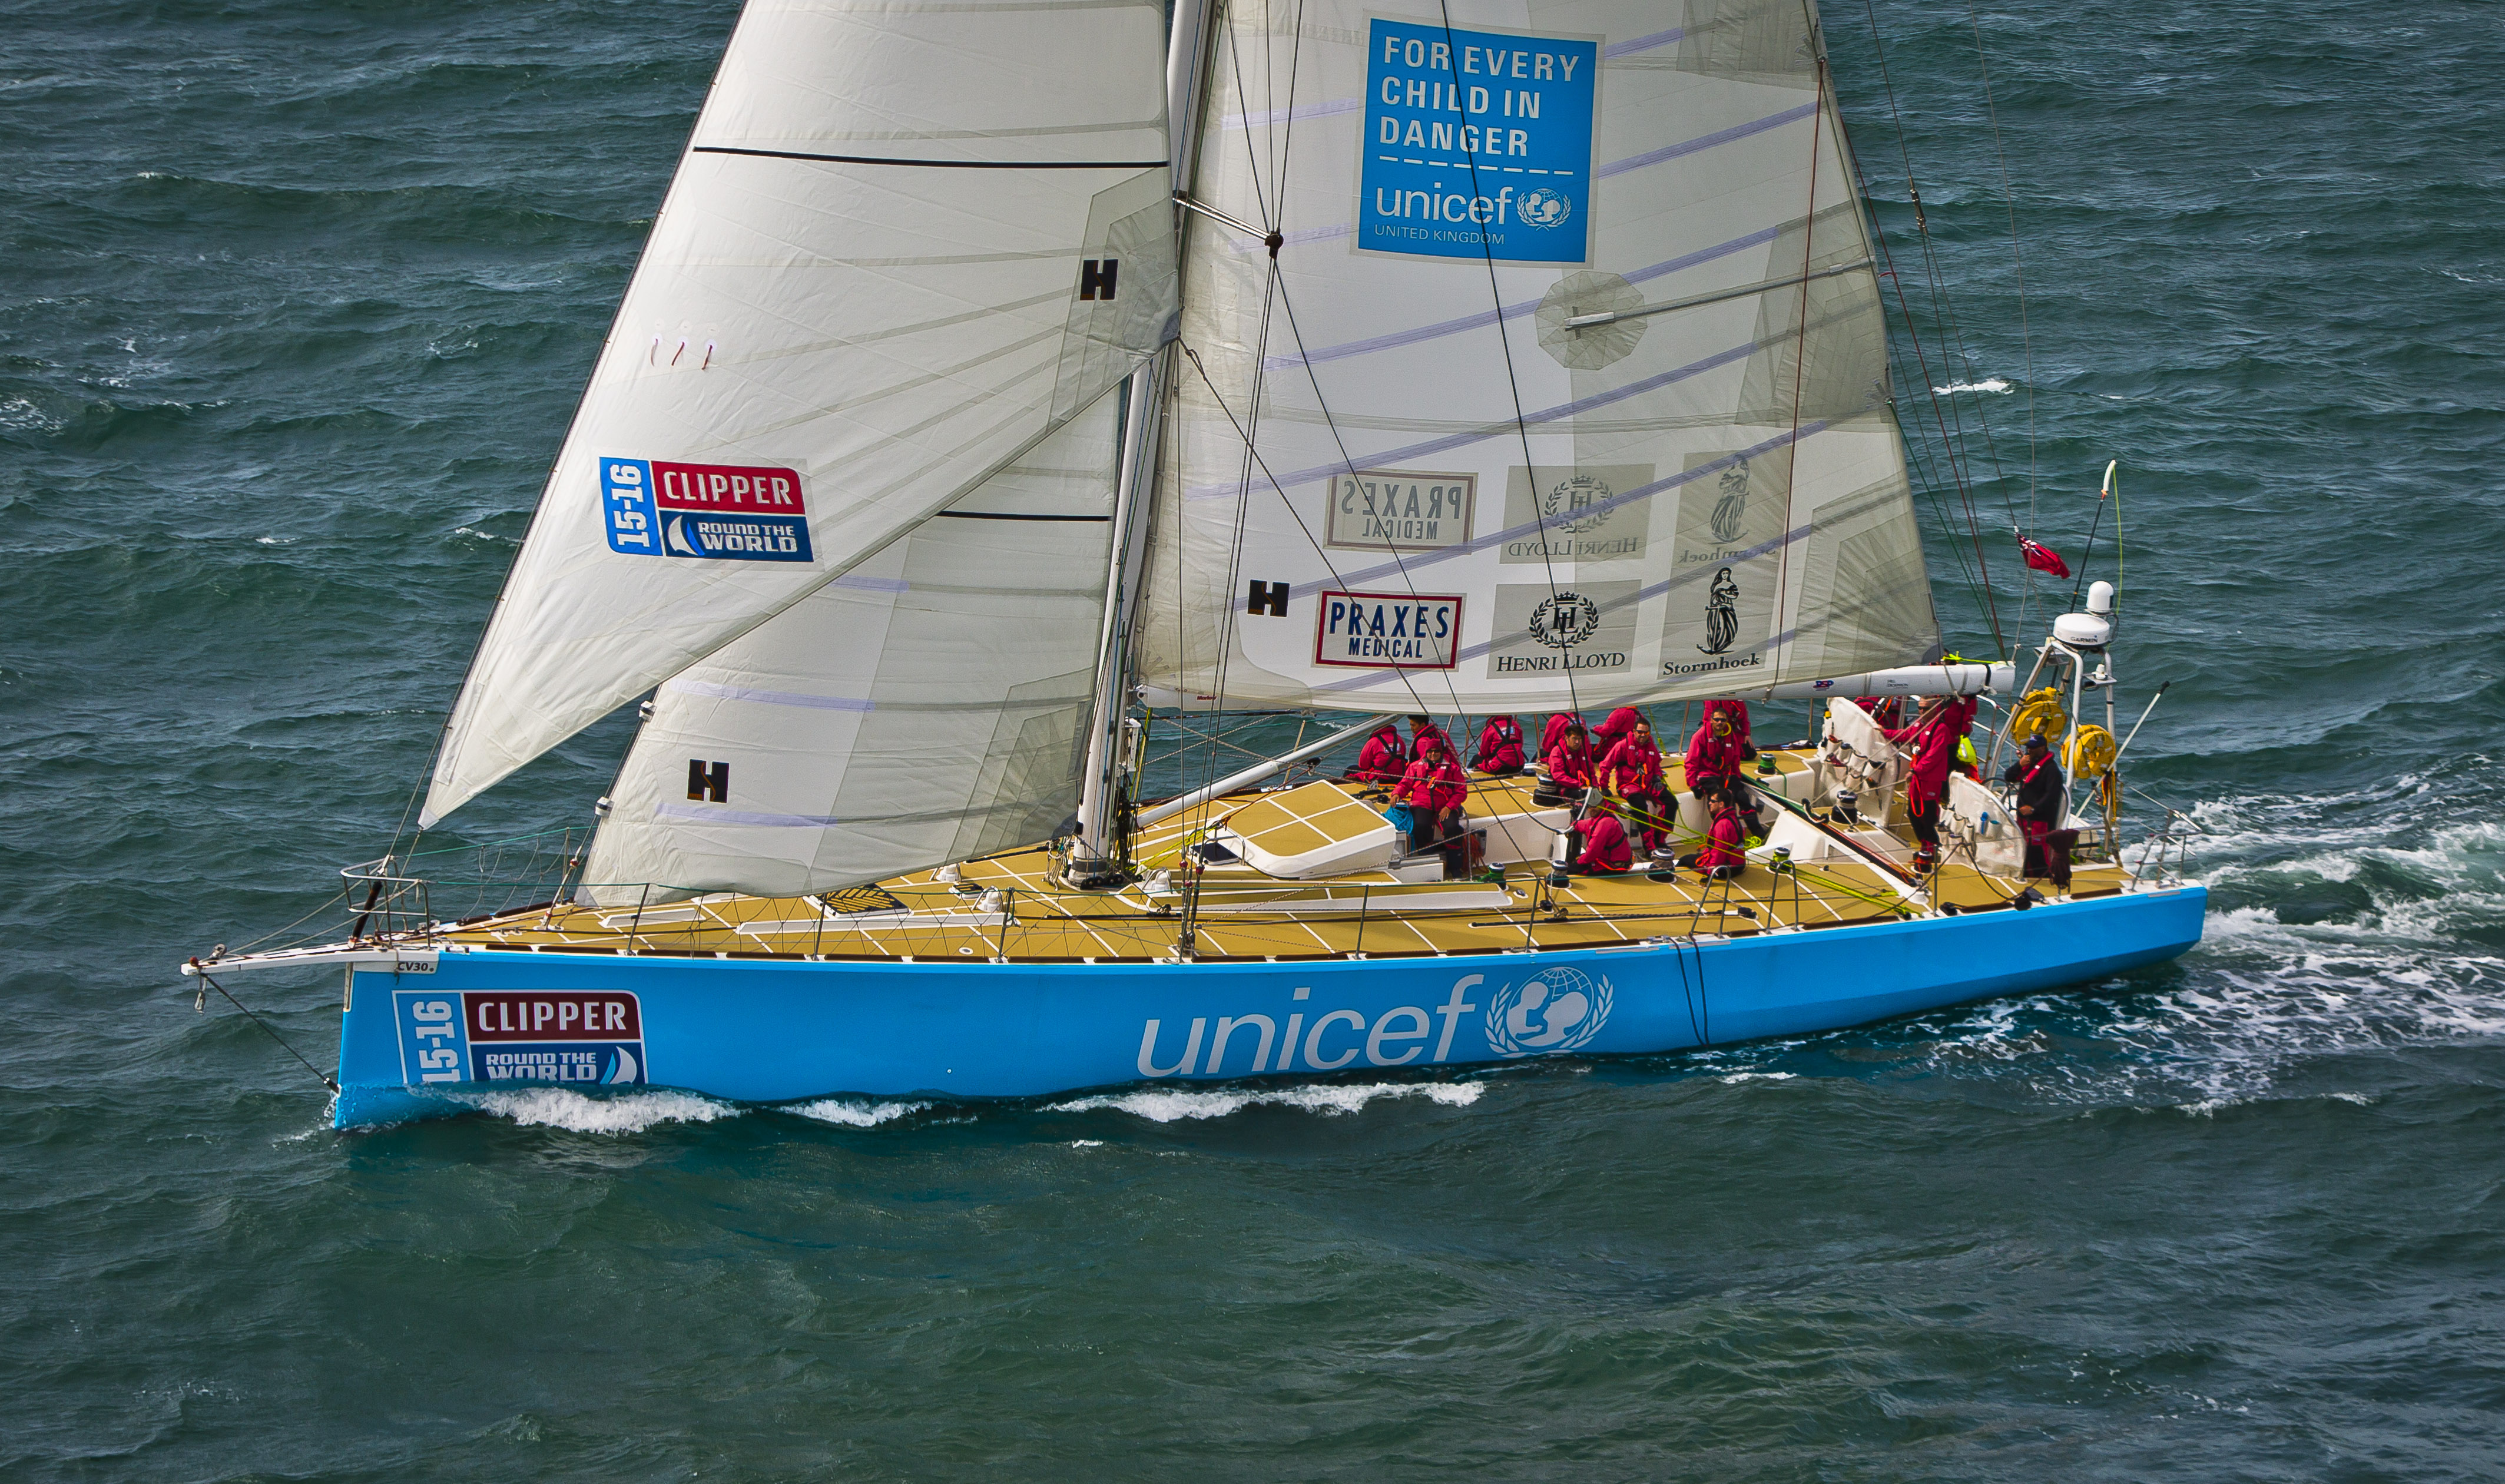 Clipper Race Unicef Yacht from 2015-16 edition